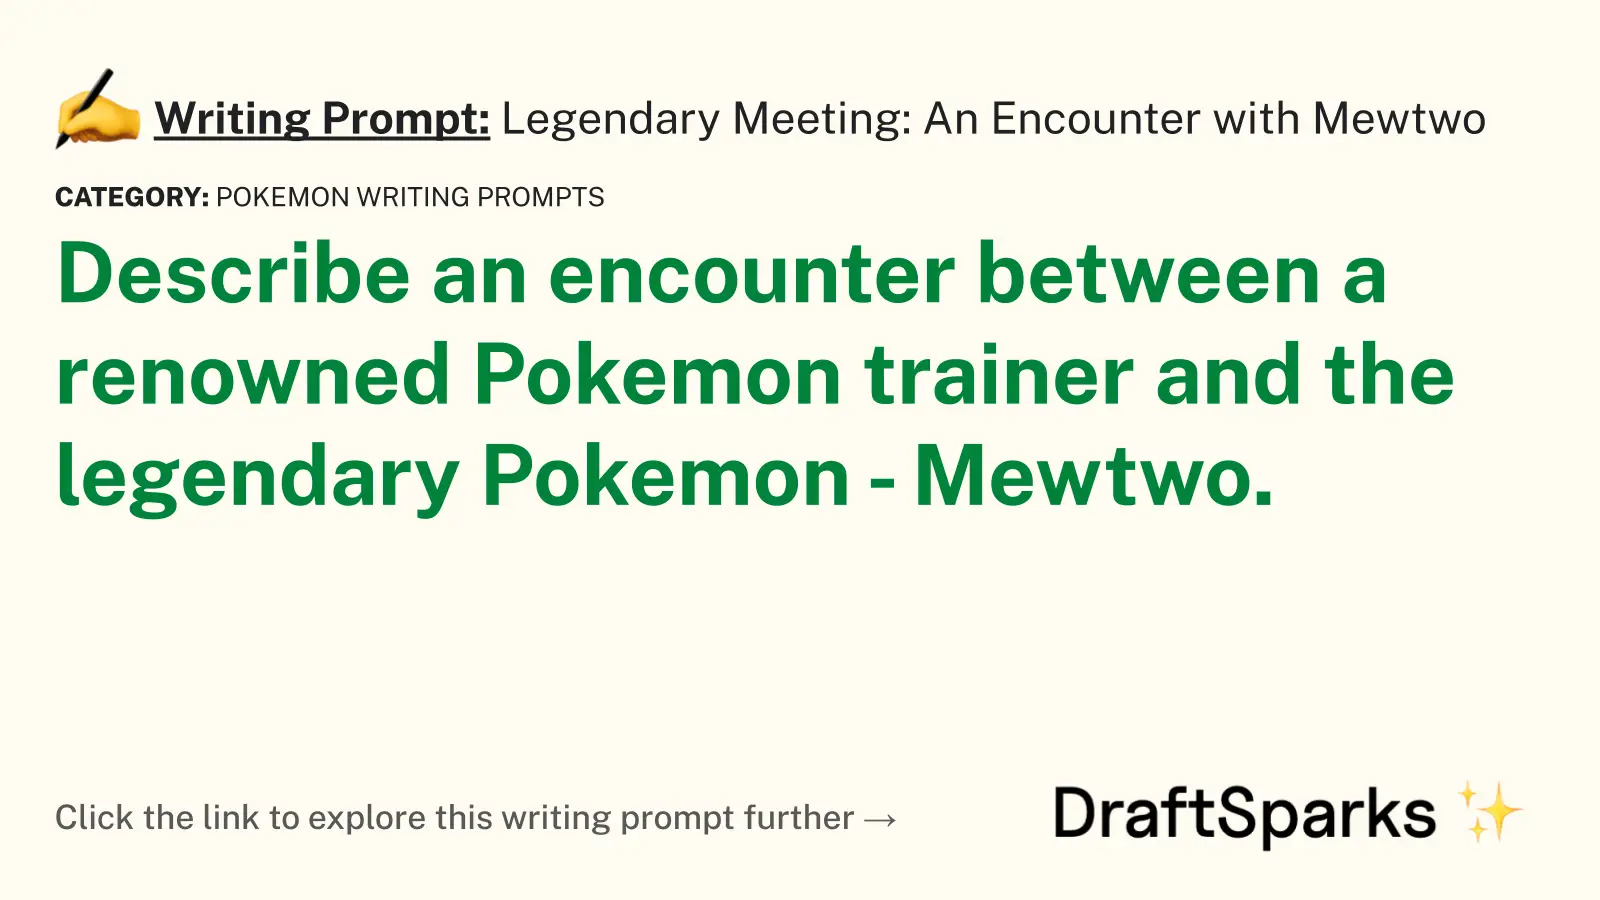 Legendary Meeting: An Encounter with Mewtwo